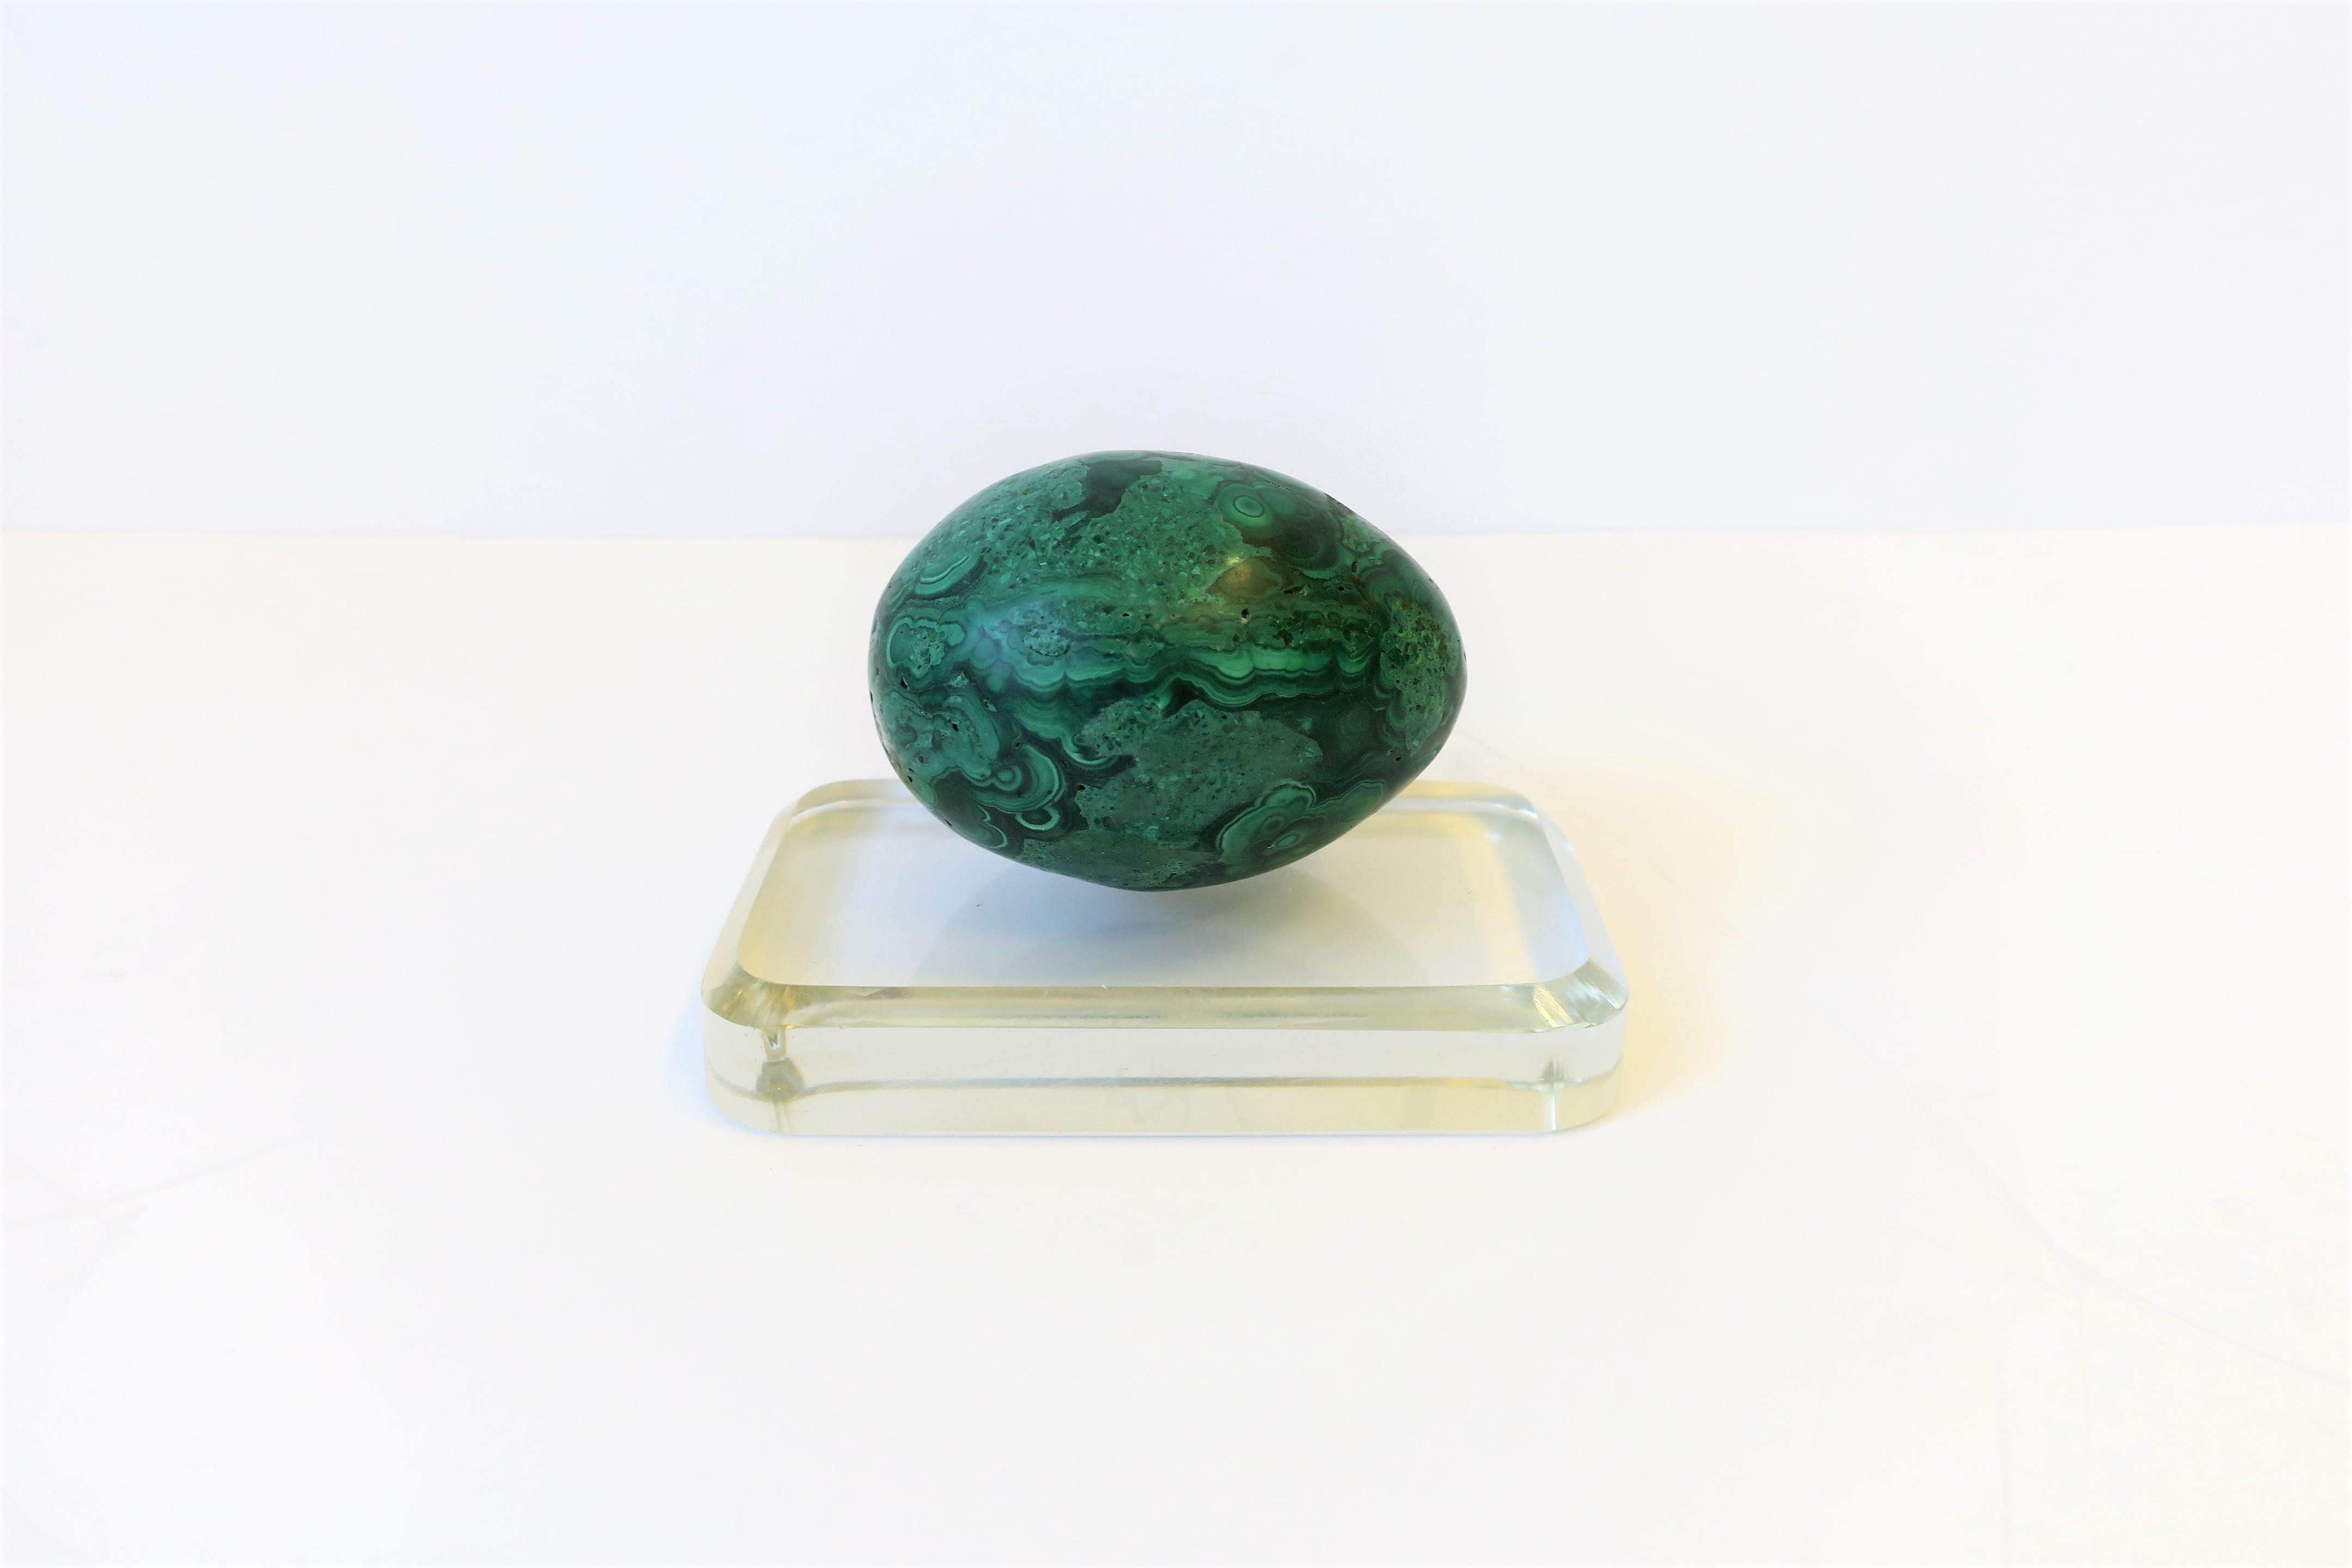 Modern Green Malachite Sculpture and Crystal Plinth Decorative Object